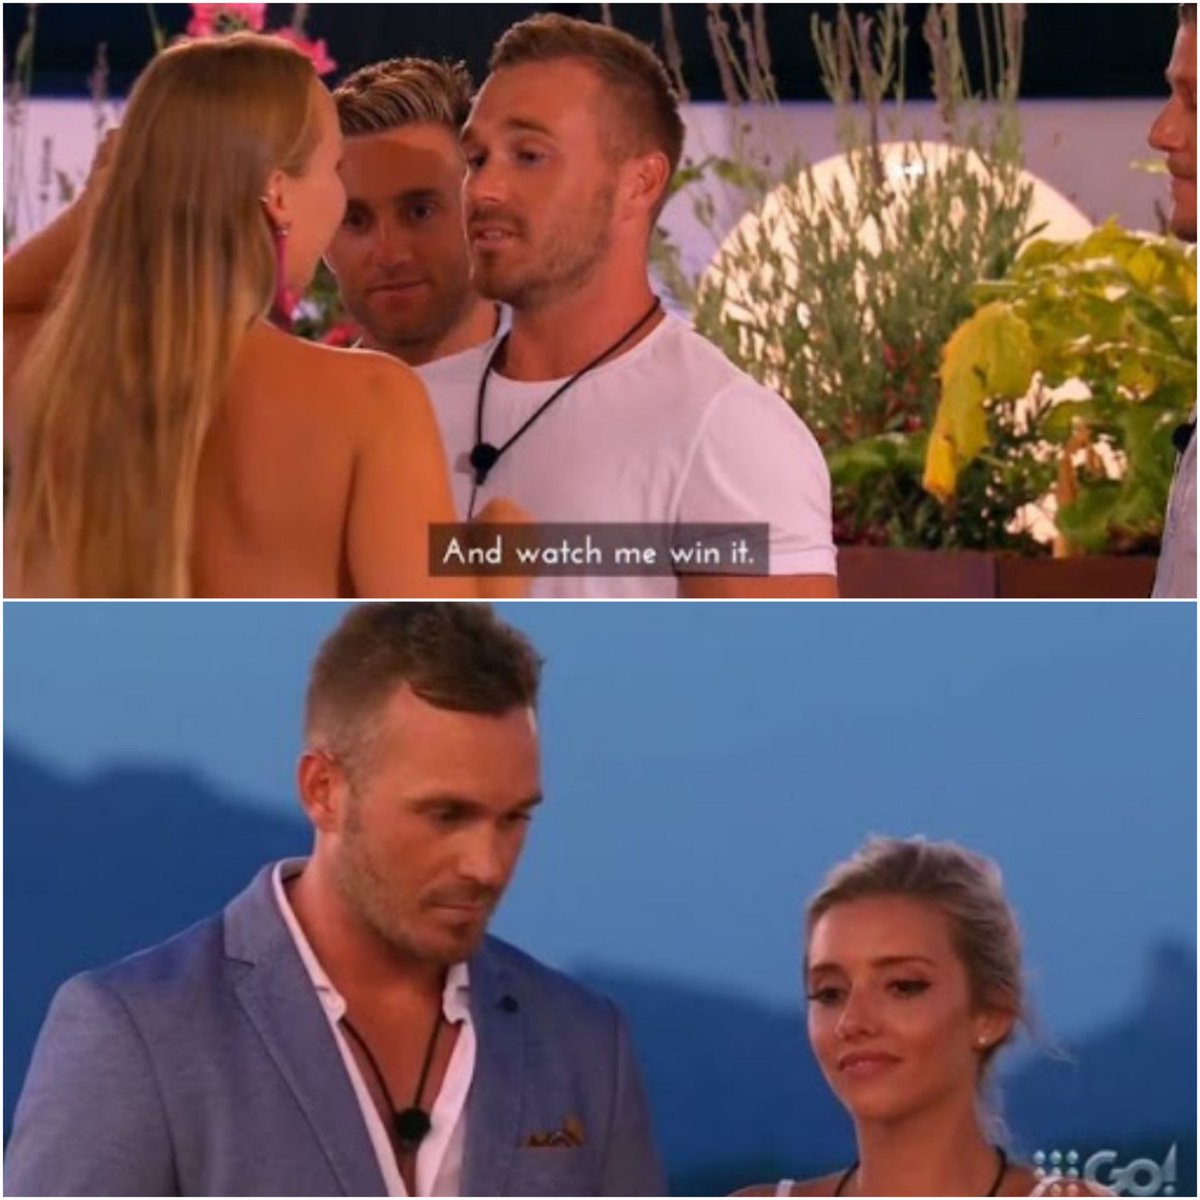 Still not over what a perfect moment this was, made my night 😂

#LoveIslandAU #priceless #watchmewin #secondplace  @LoveIslandAU